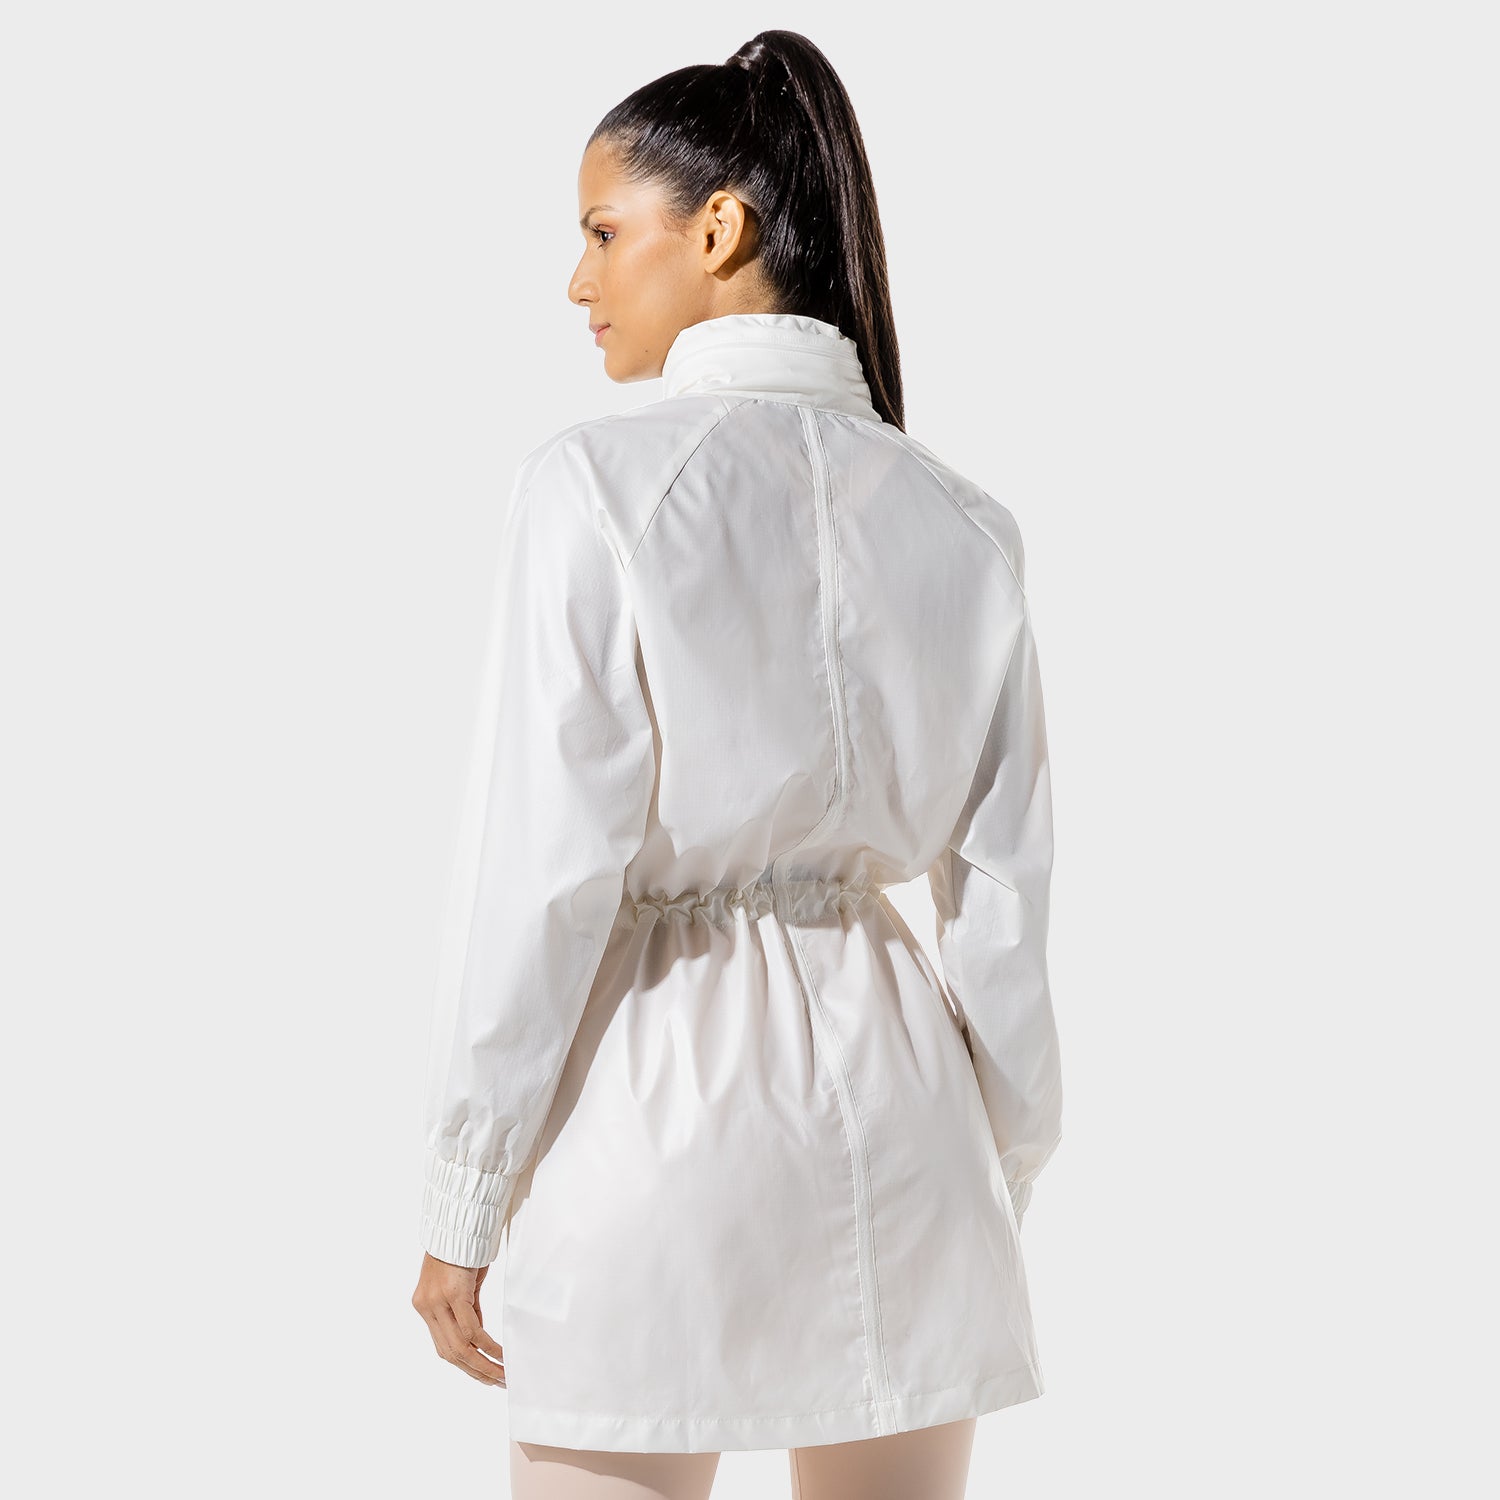 squatwolf-workout-clothes-womens-fitness-long-jacket-white-athletic-tops-women